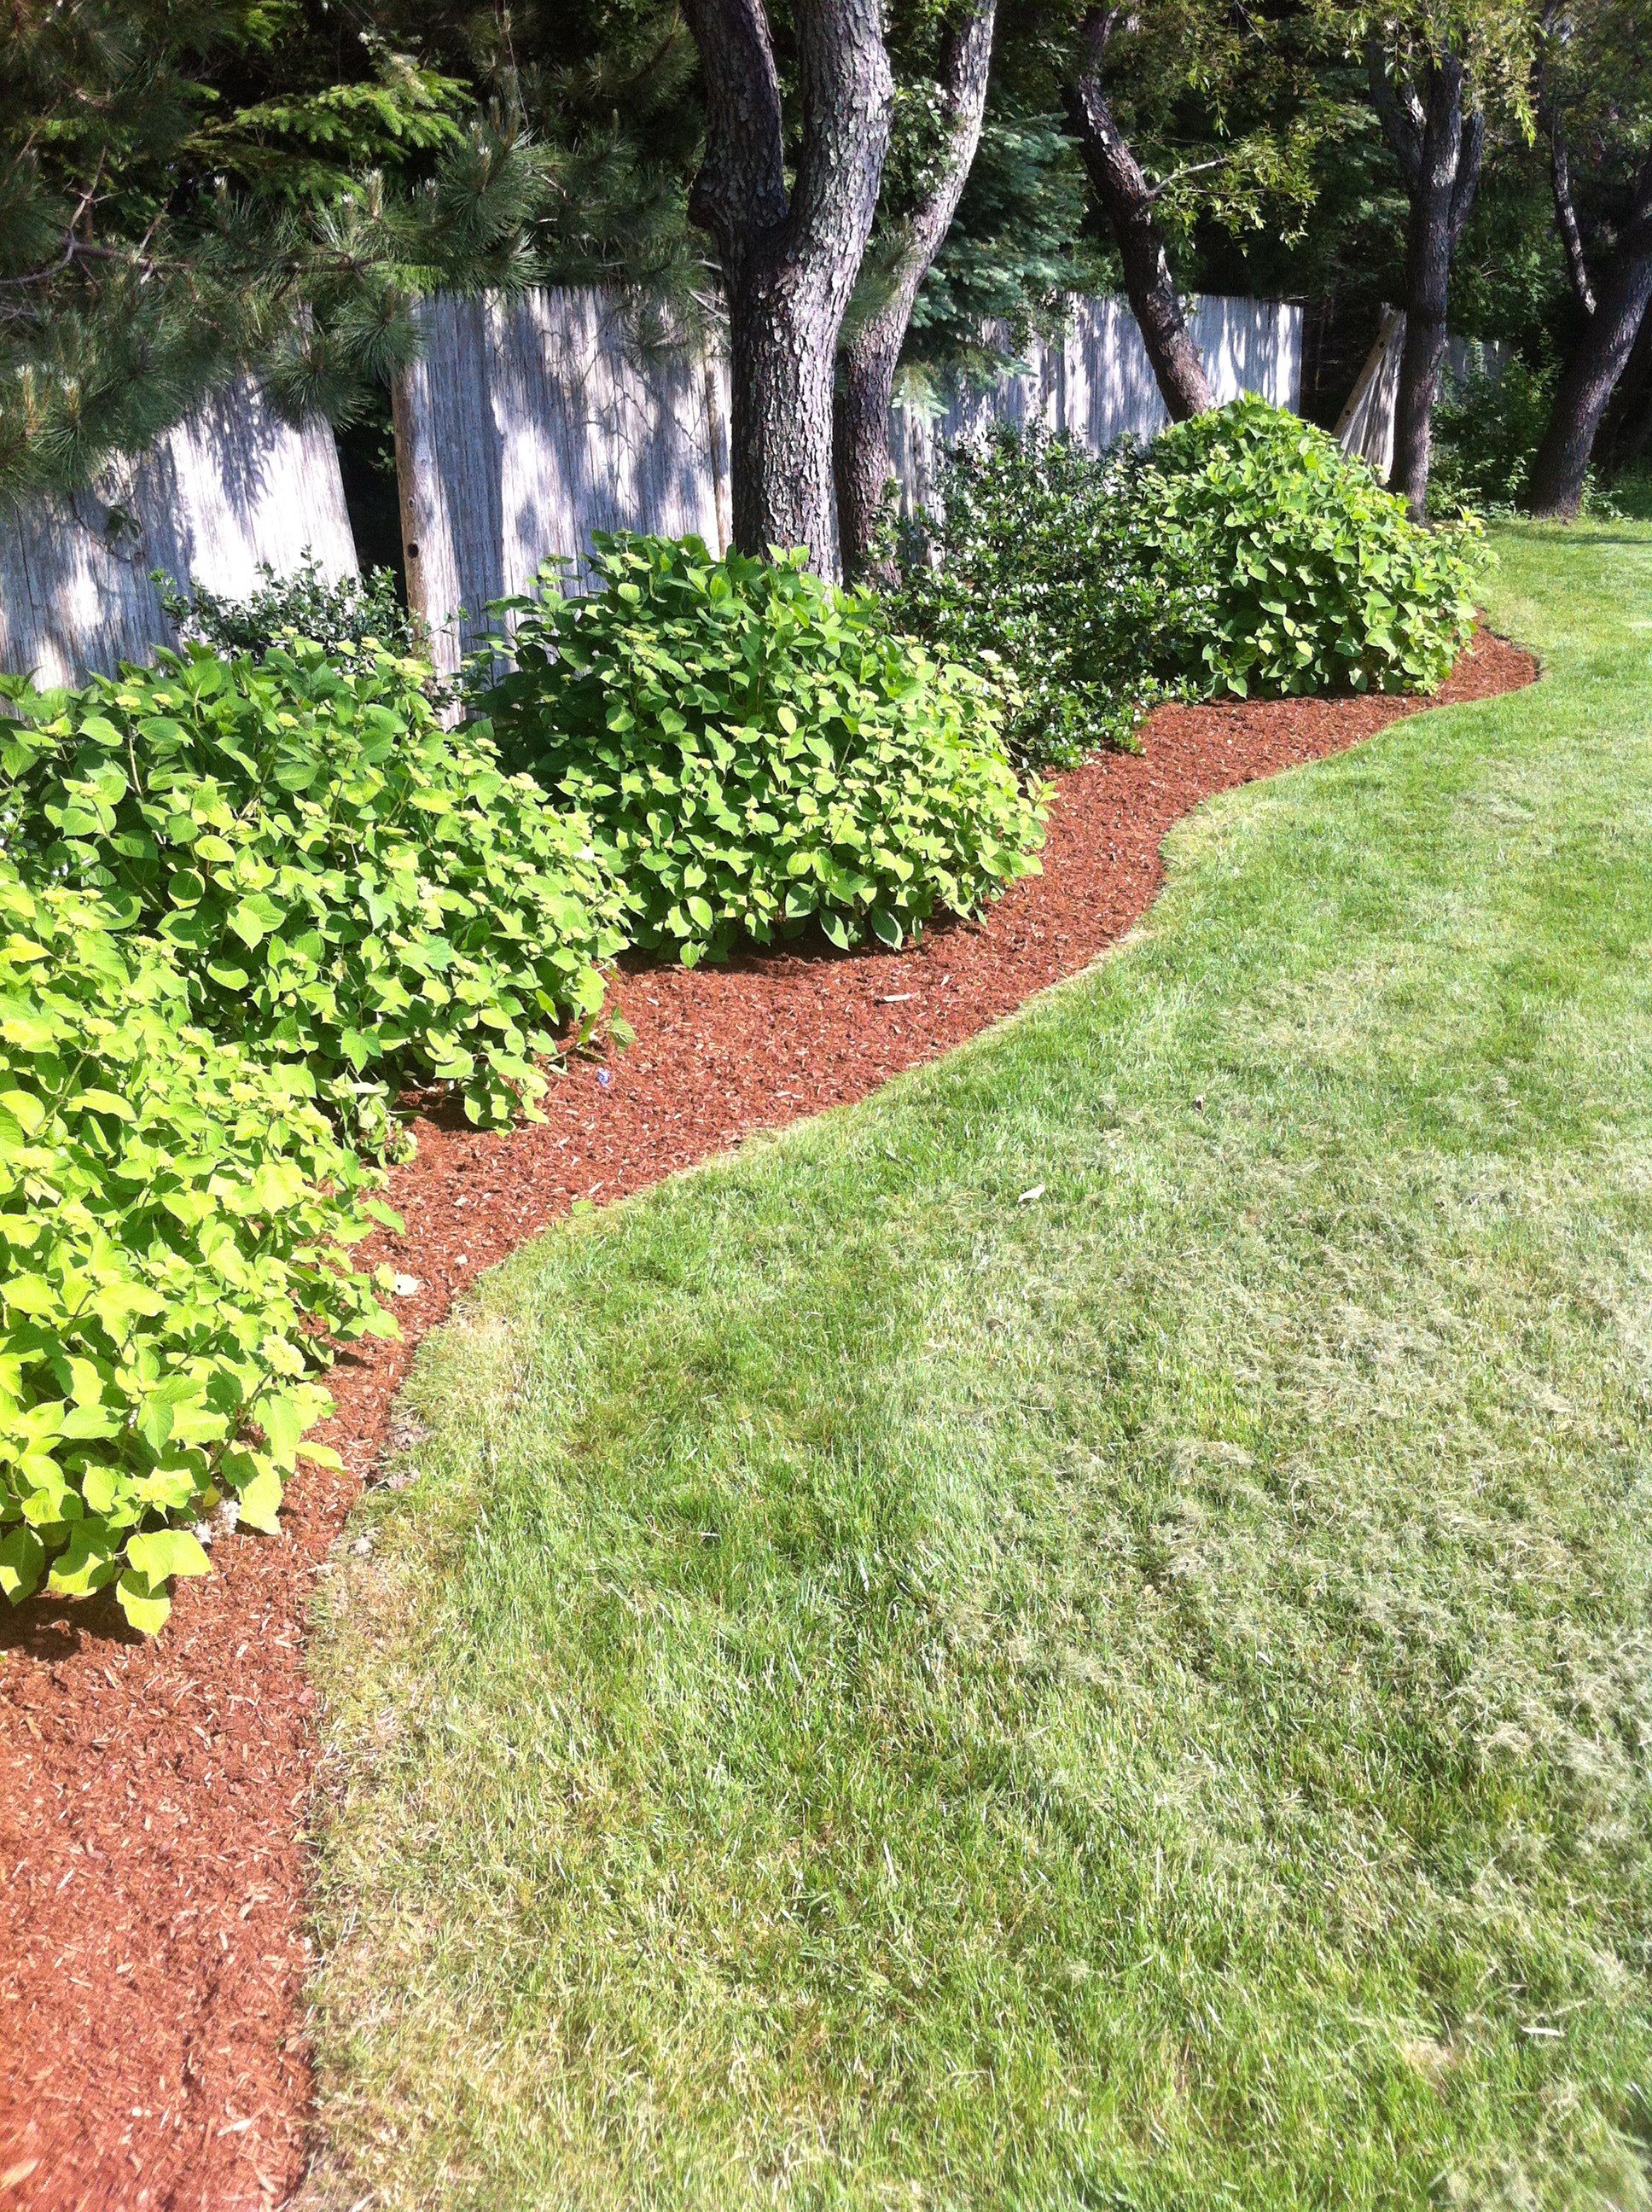  Landscaping Ideas For A Low Maintenance Yard - Low Maintenance Landscaping Ideas Front Yard